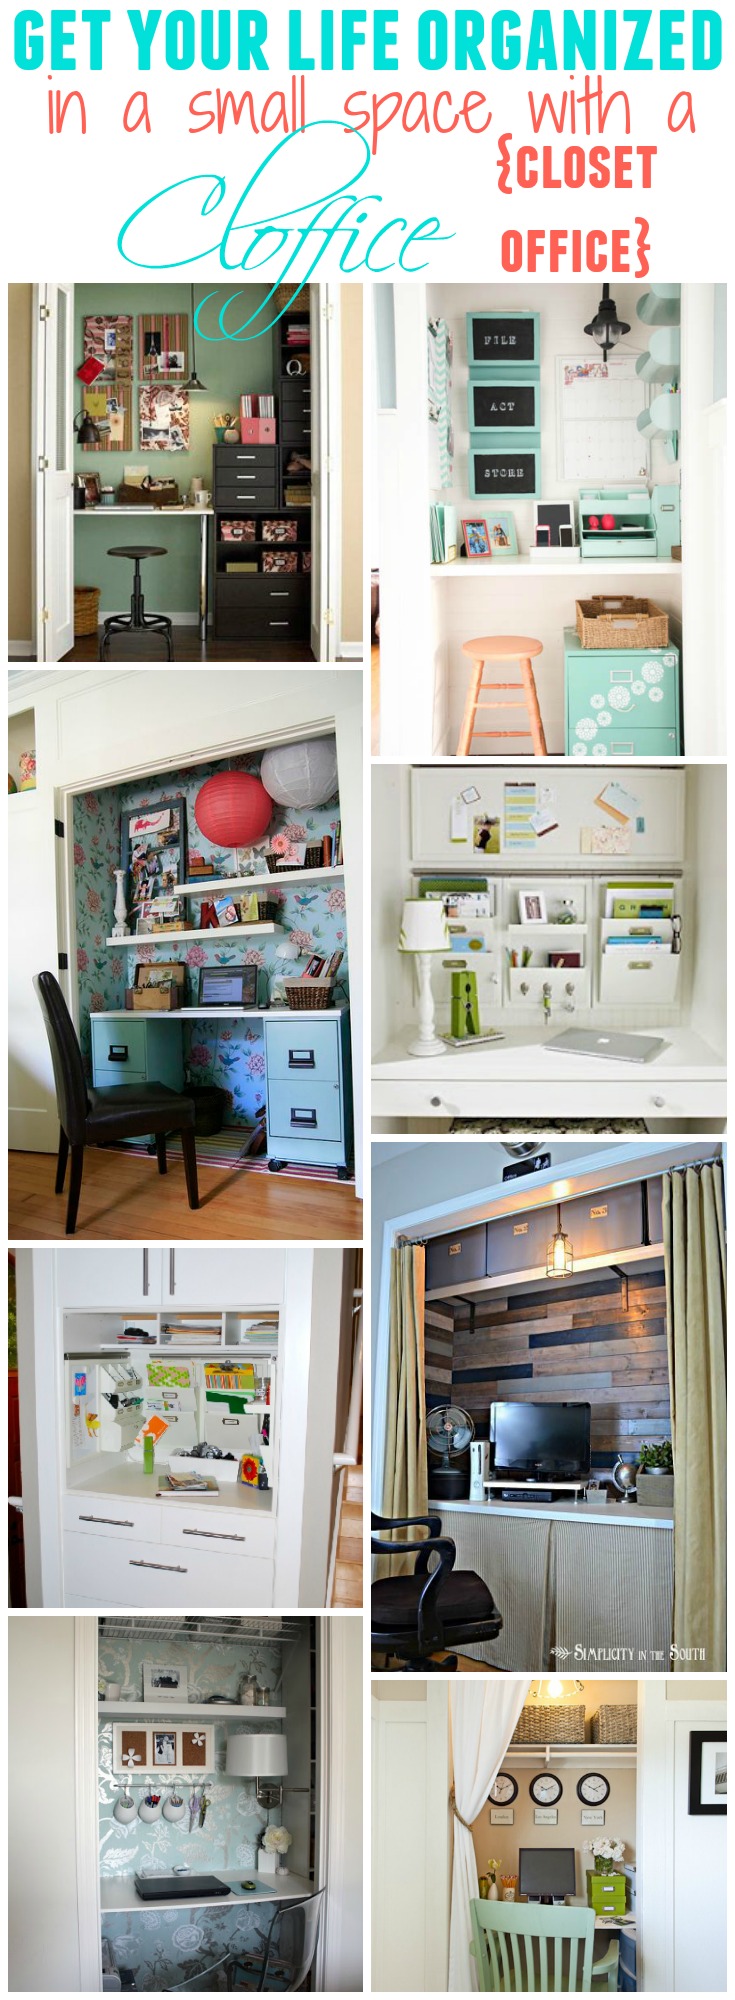 Get Your Life Organized in a Small Space with a Closet Office at The Happy Housie